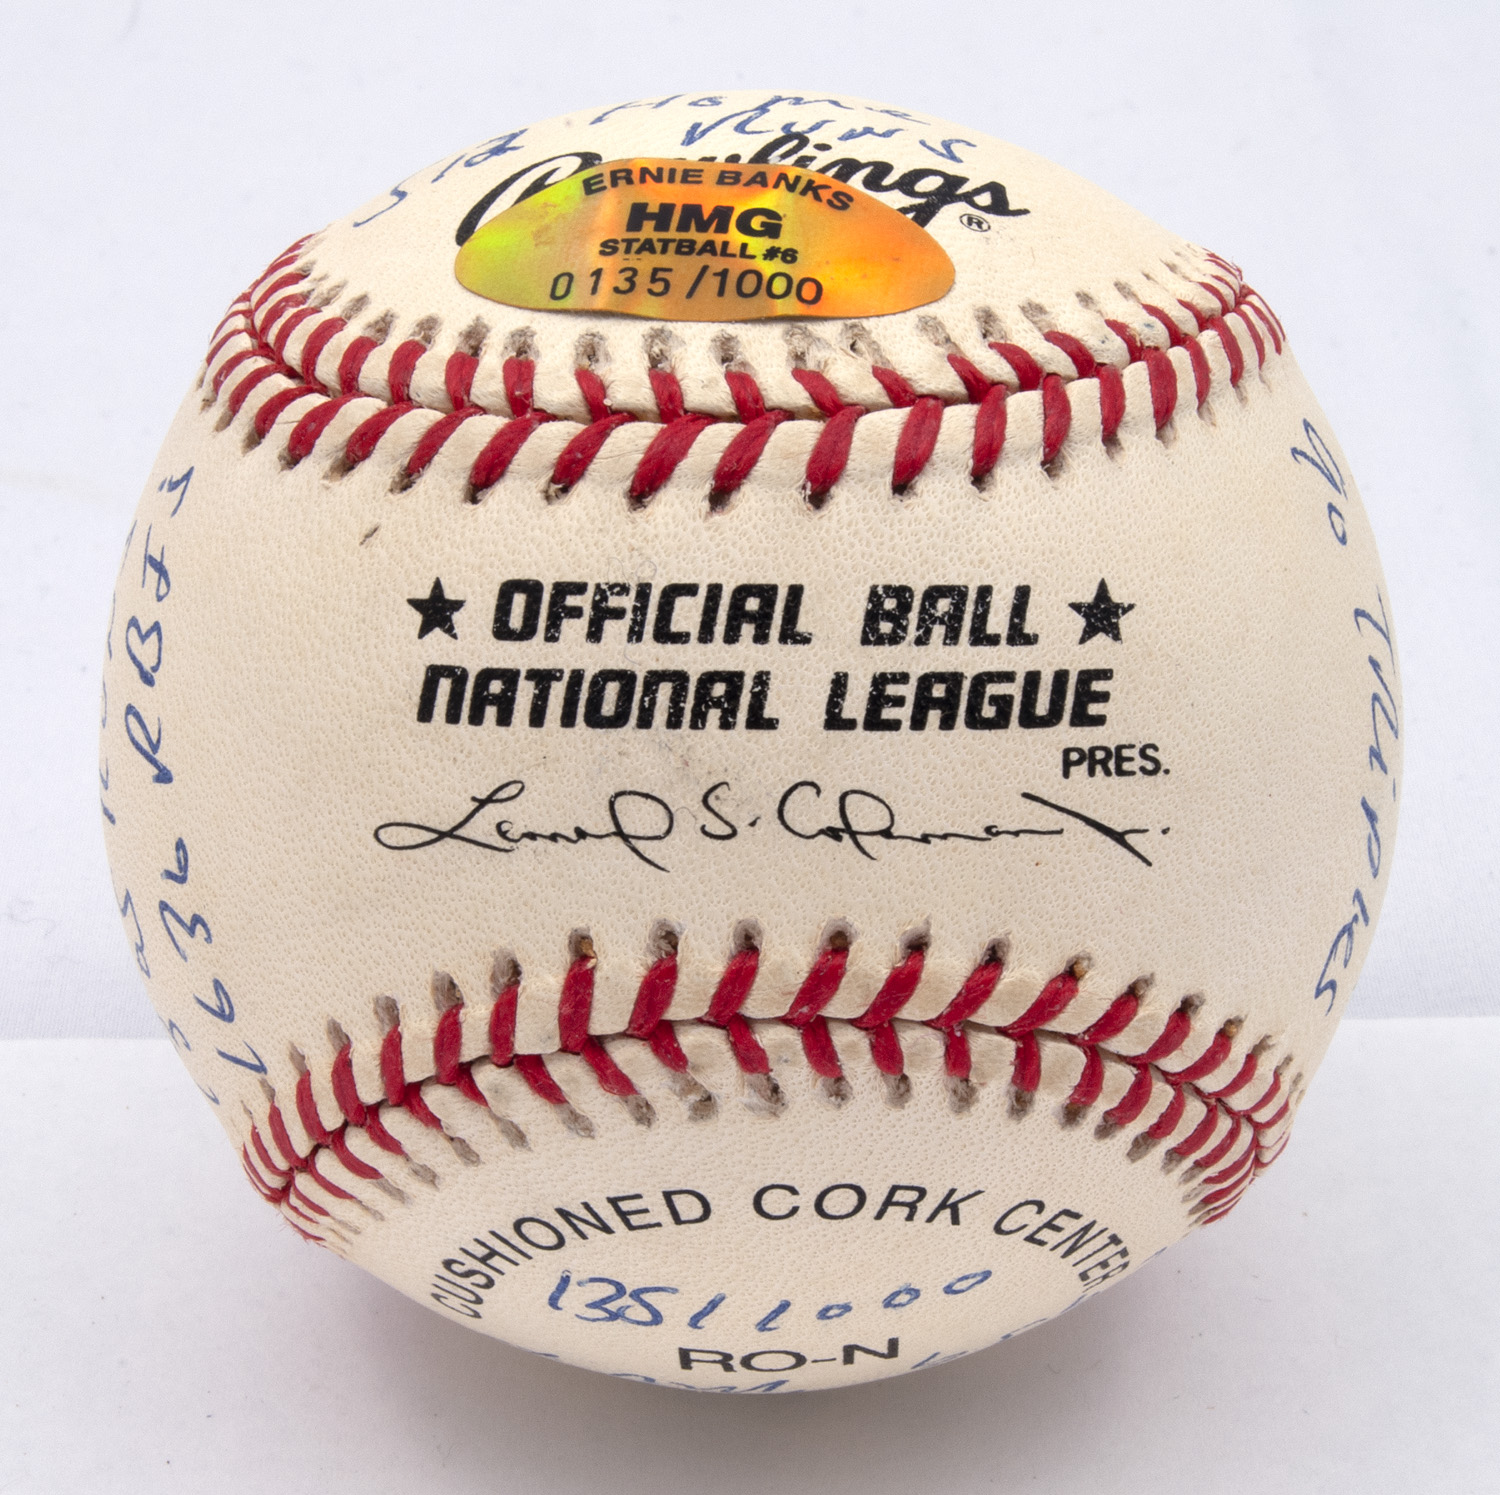 Lot Detail - ERNIE BANKS SINGLE SIGNED BASEBALL WITH CAREER STATS NOTATIONS